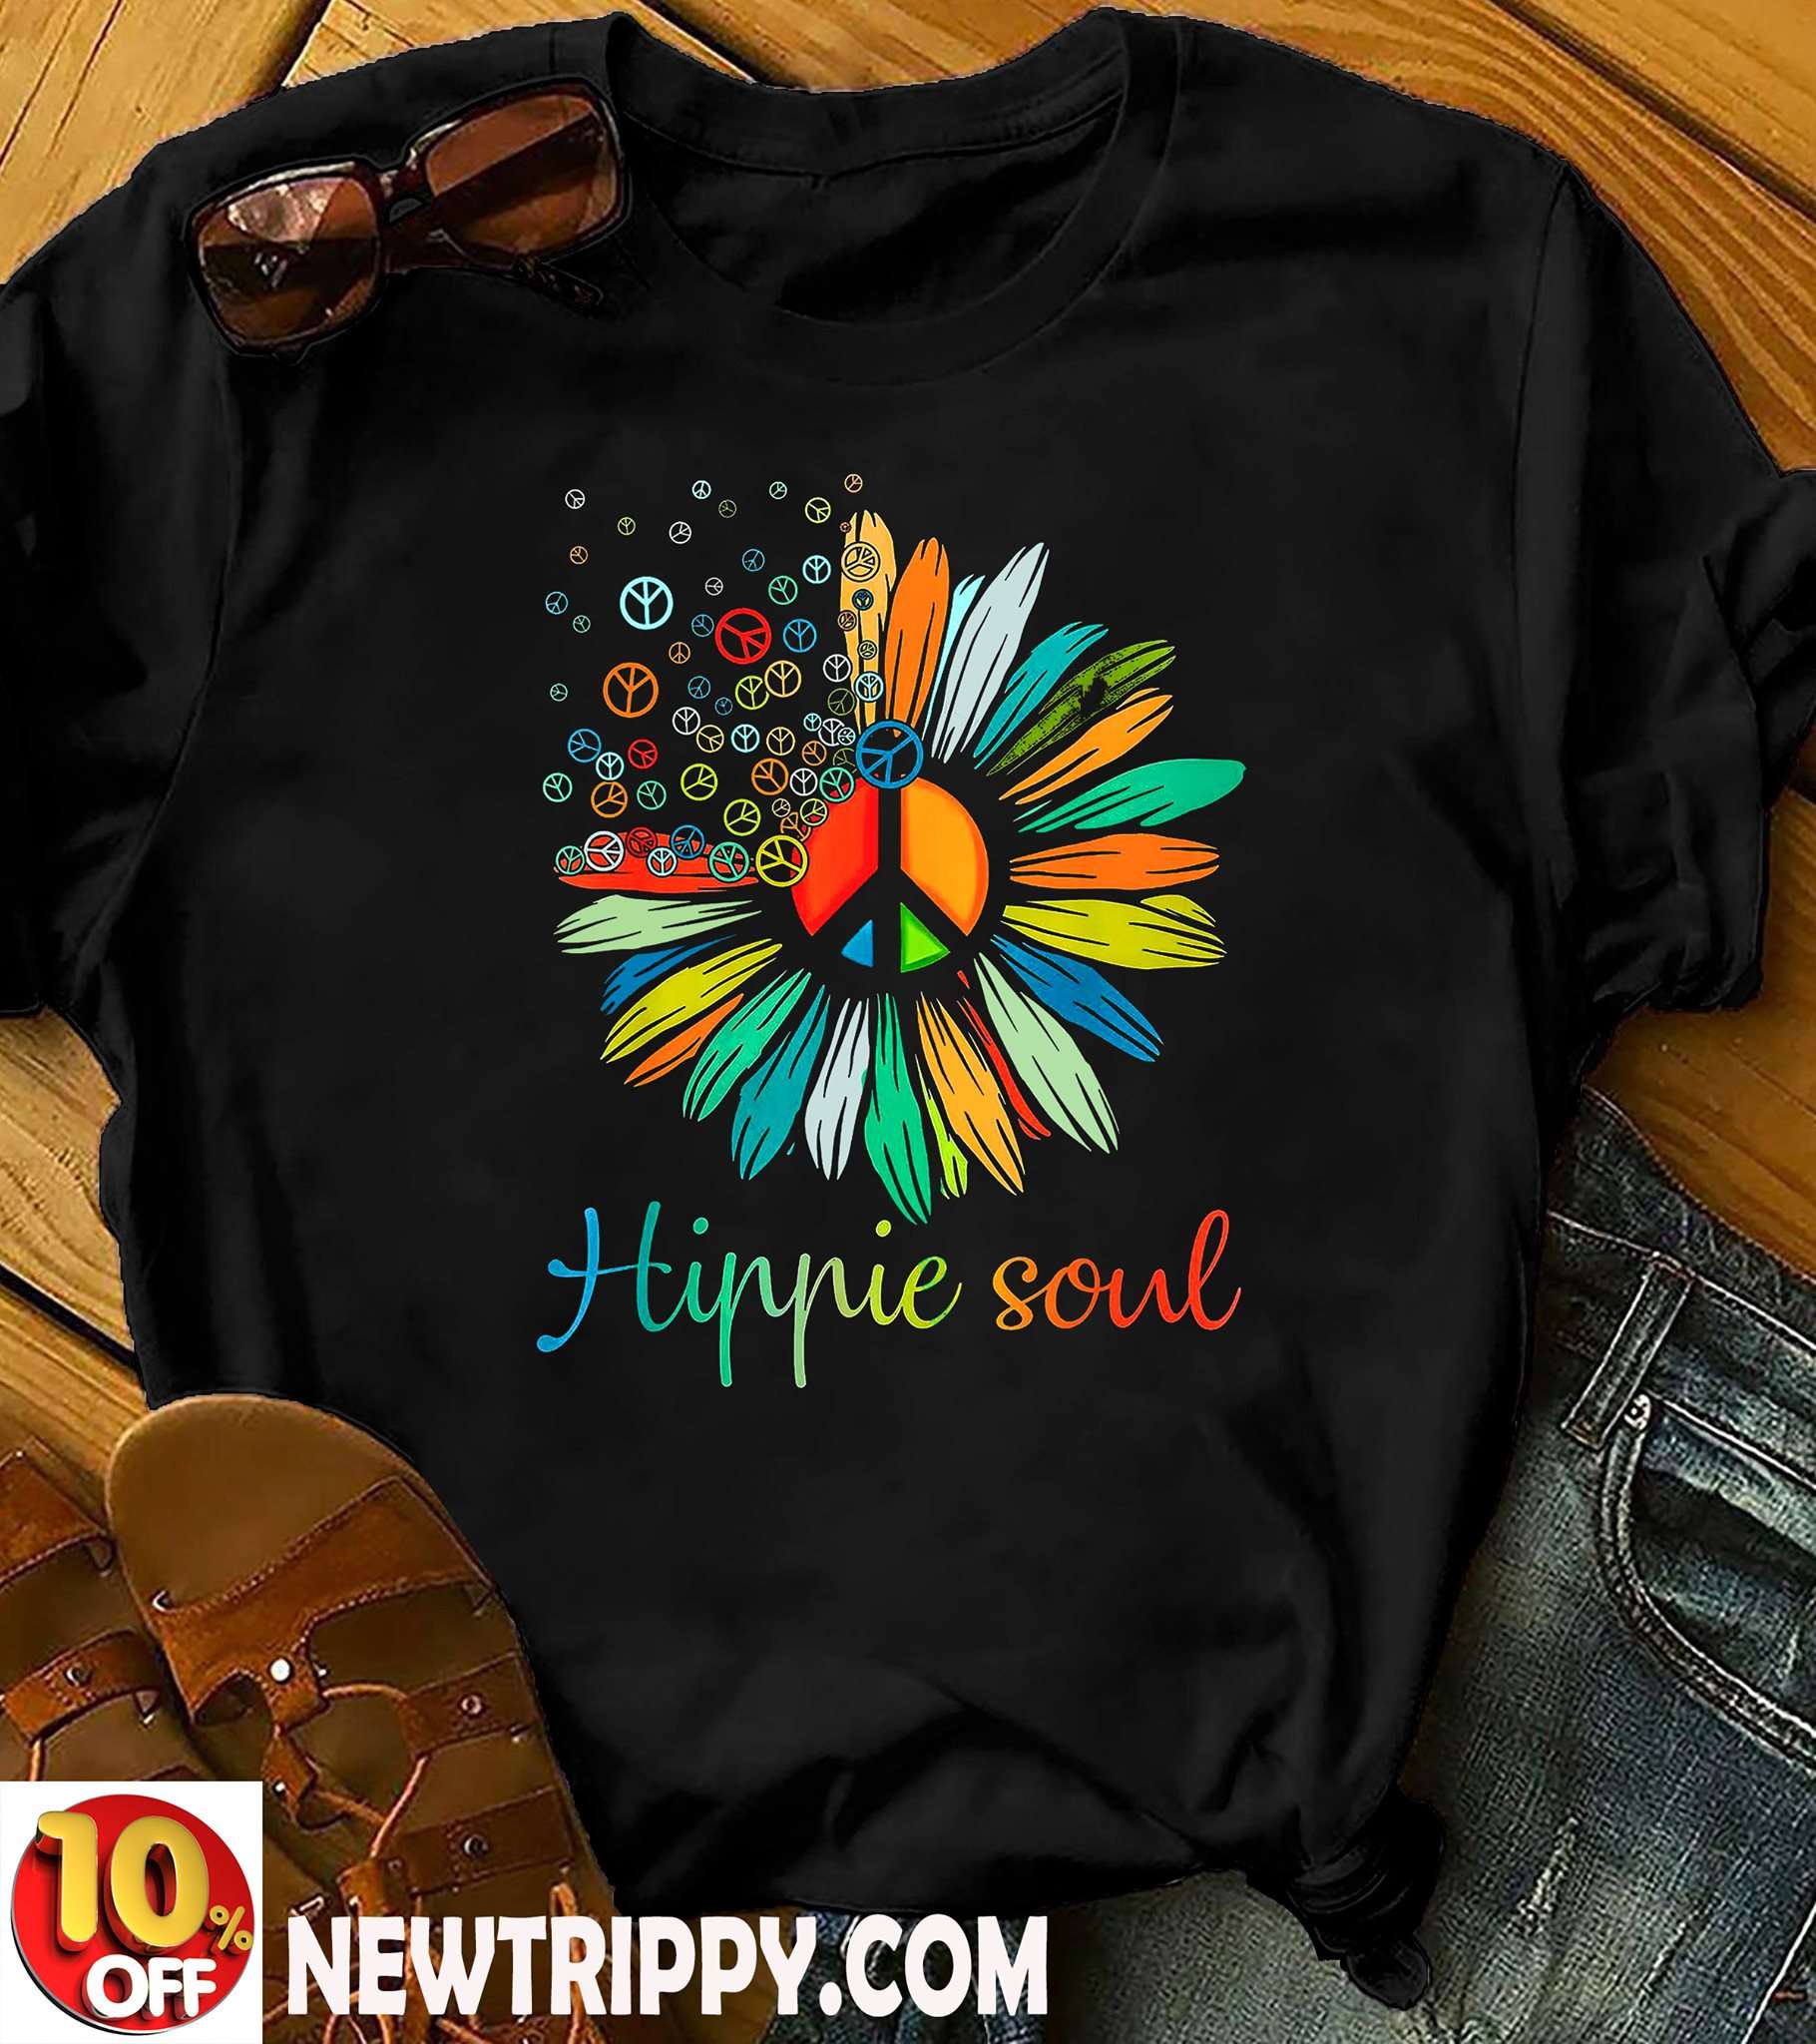 Hippie soul - Hippie symbol, the counterculture of the 1960s, youth movement